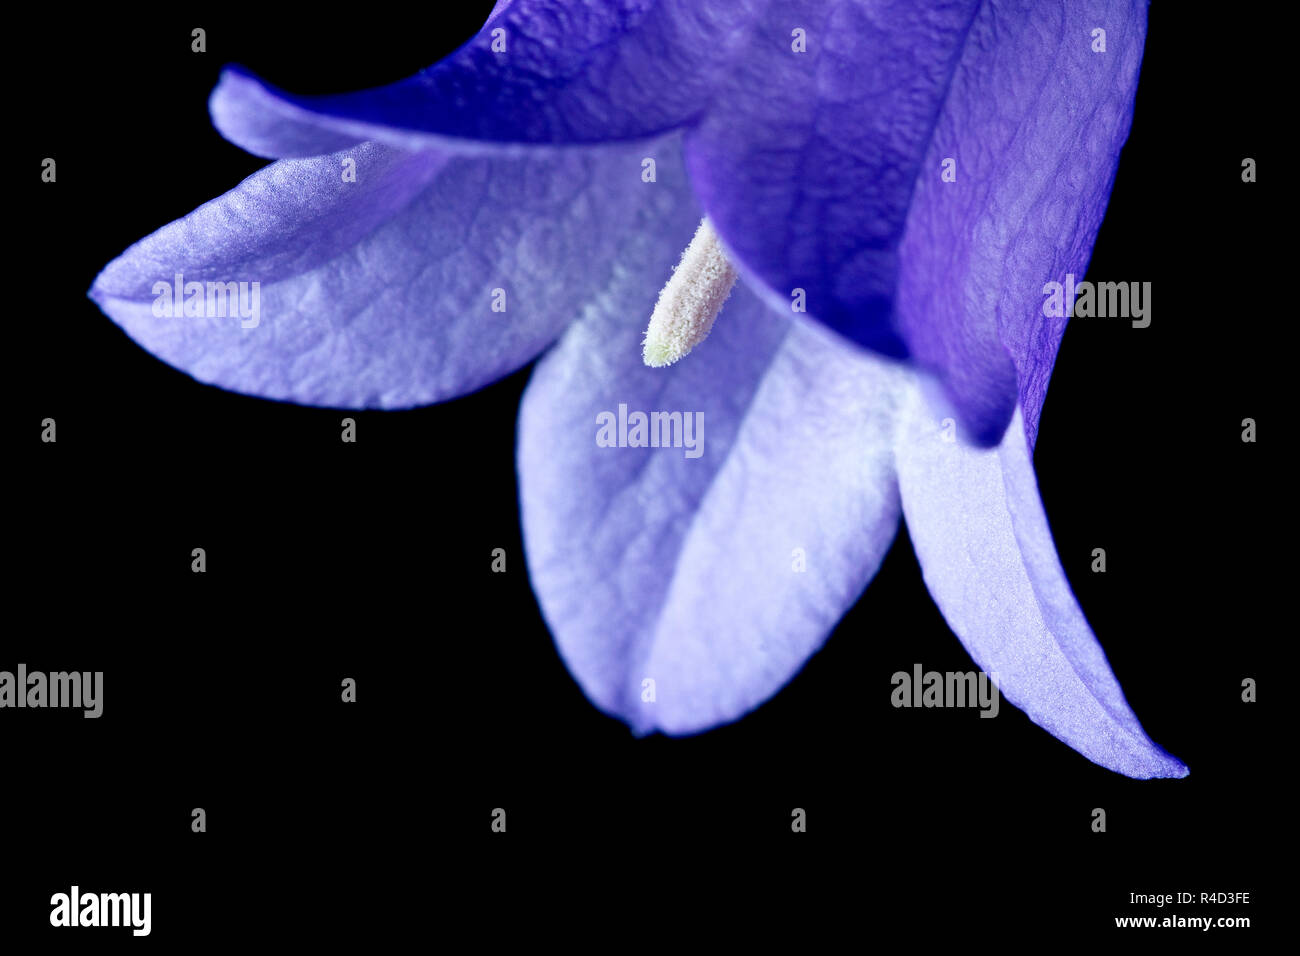 Harebell or Scottish Bluebell (campanula rotundifolia), a close up still life of the flower against a black background. Stock Photo